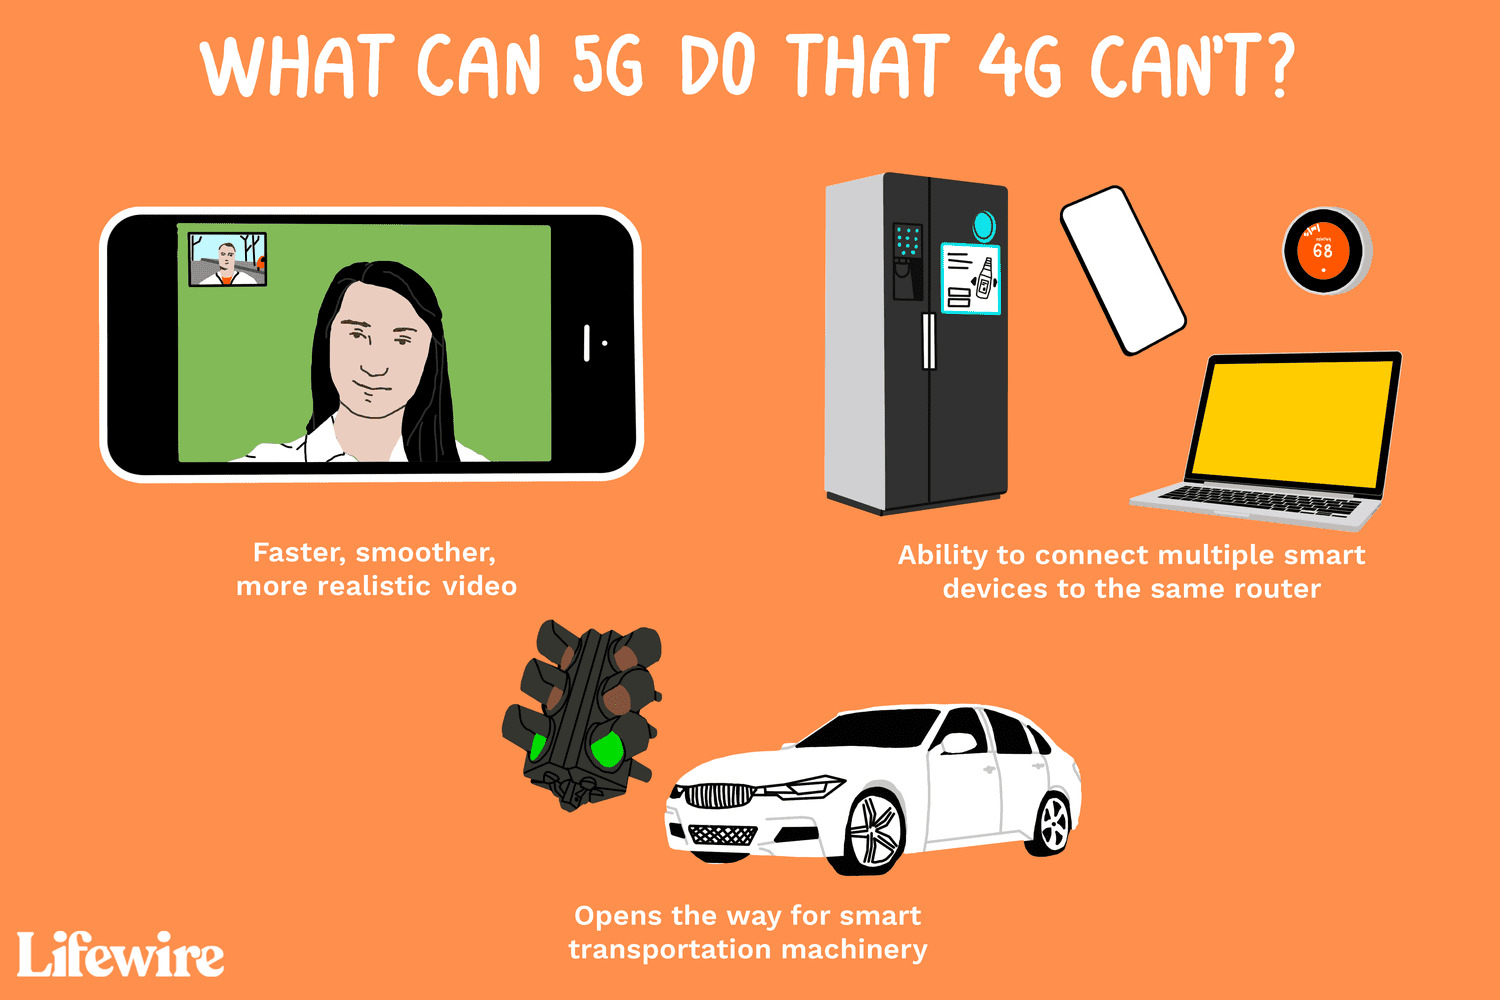 5g-vs-4g-key-differences-between-networks-explained